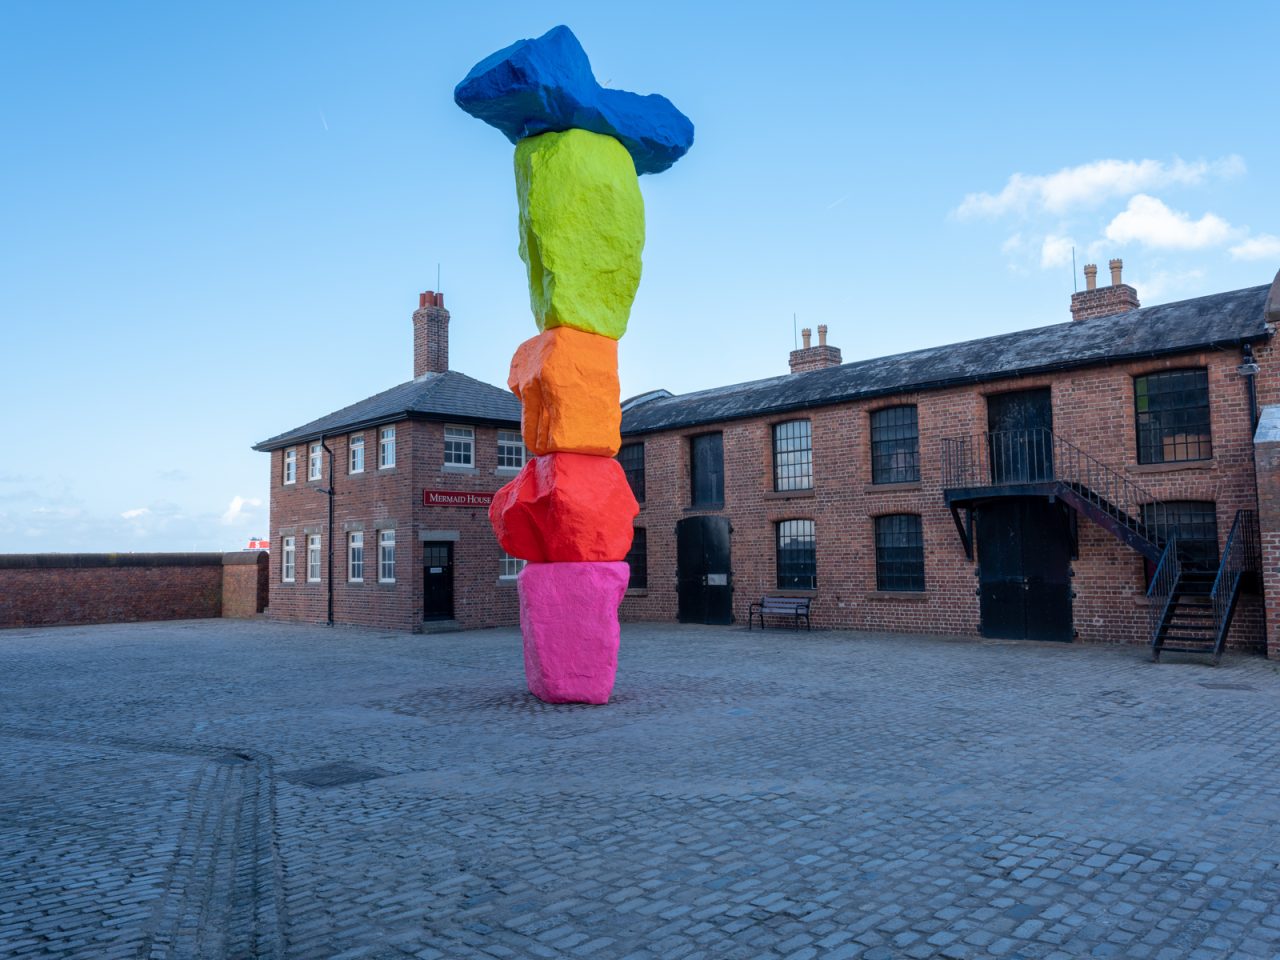 A 10-metre high sculpture on Liverpool’s waterfront, the sculpture consists of 5 vertically-stacked rocks painted in bright fluorescent colours